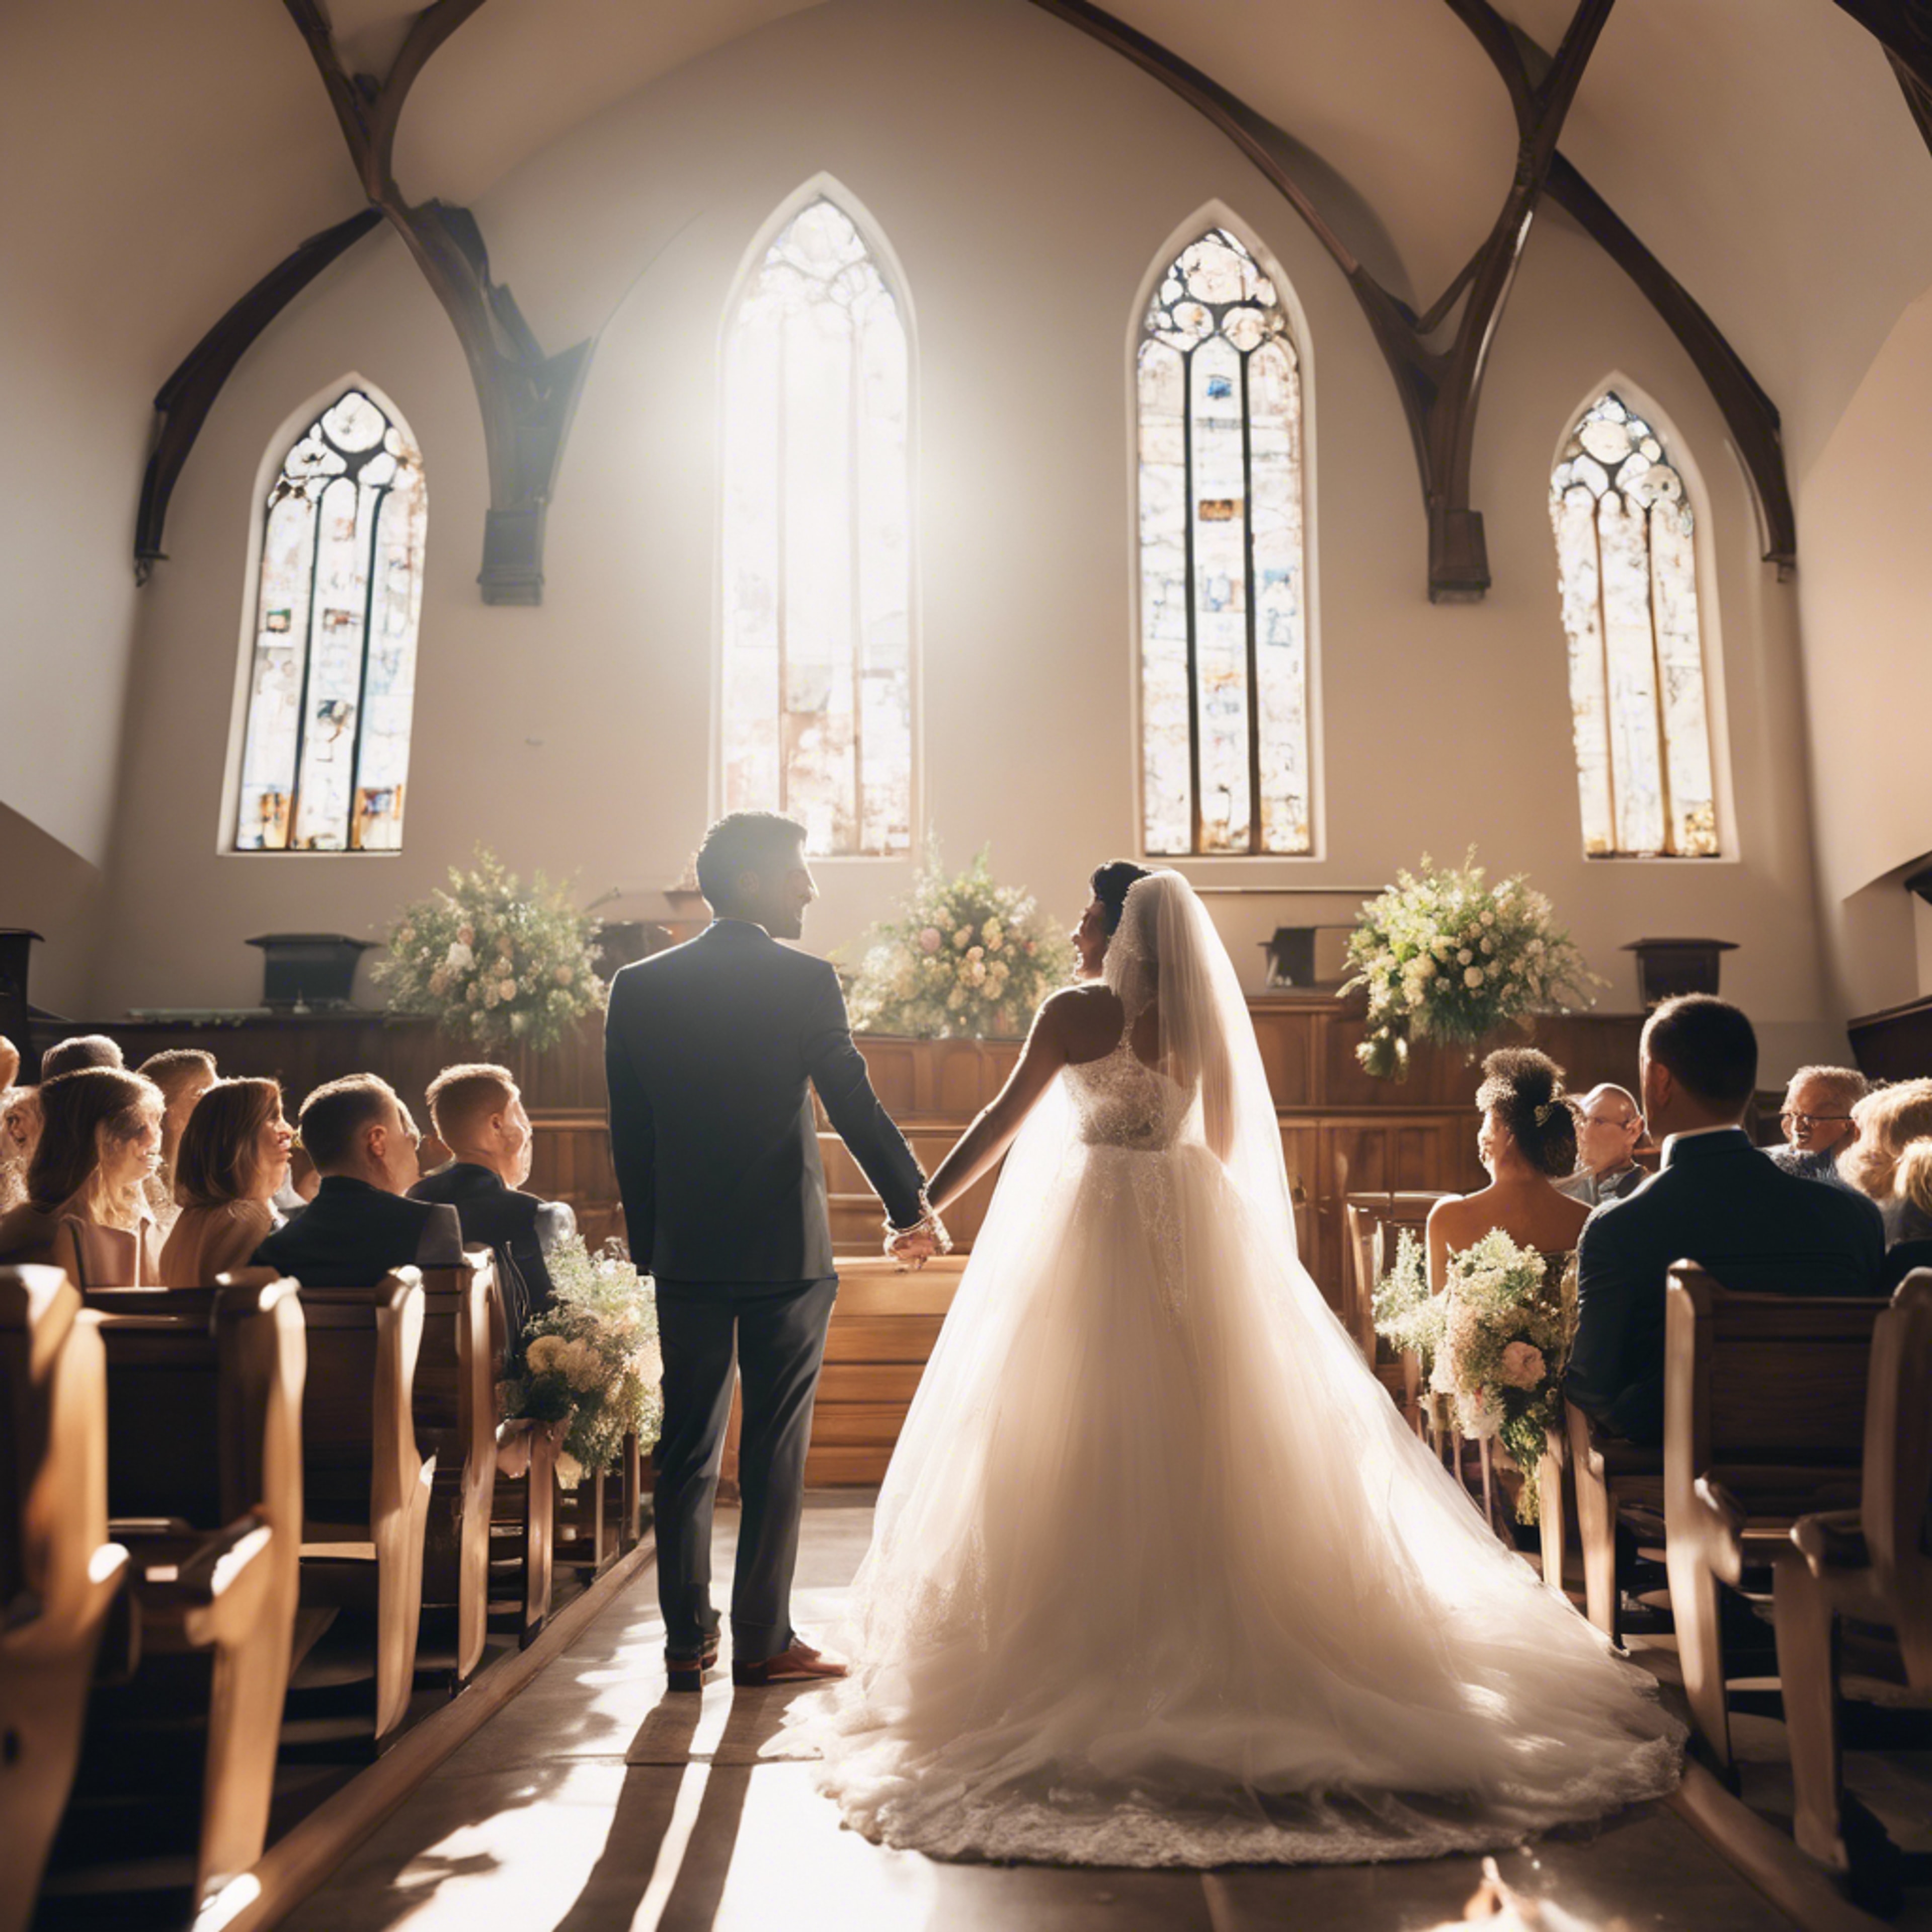 A happy couple getting married in a sunlit church, filled with joy and love. Tapeta[c91a19bd1c8e4c9b9bbb]